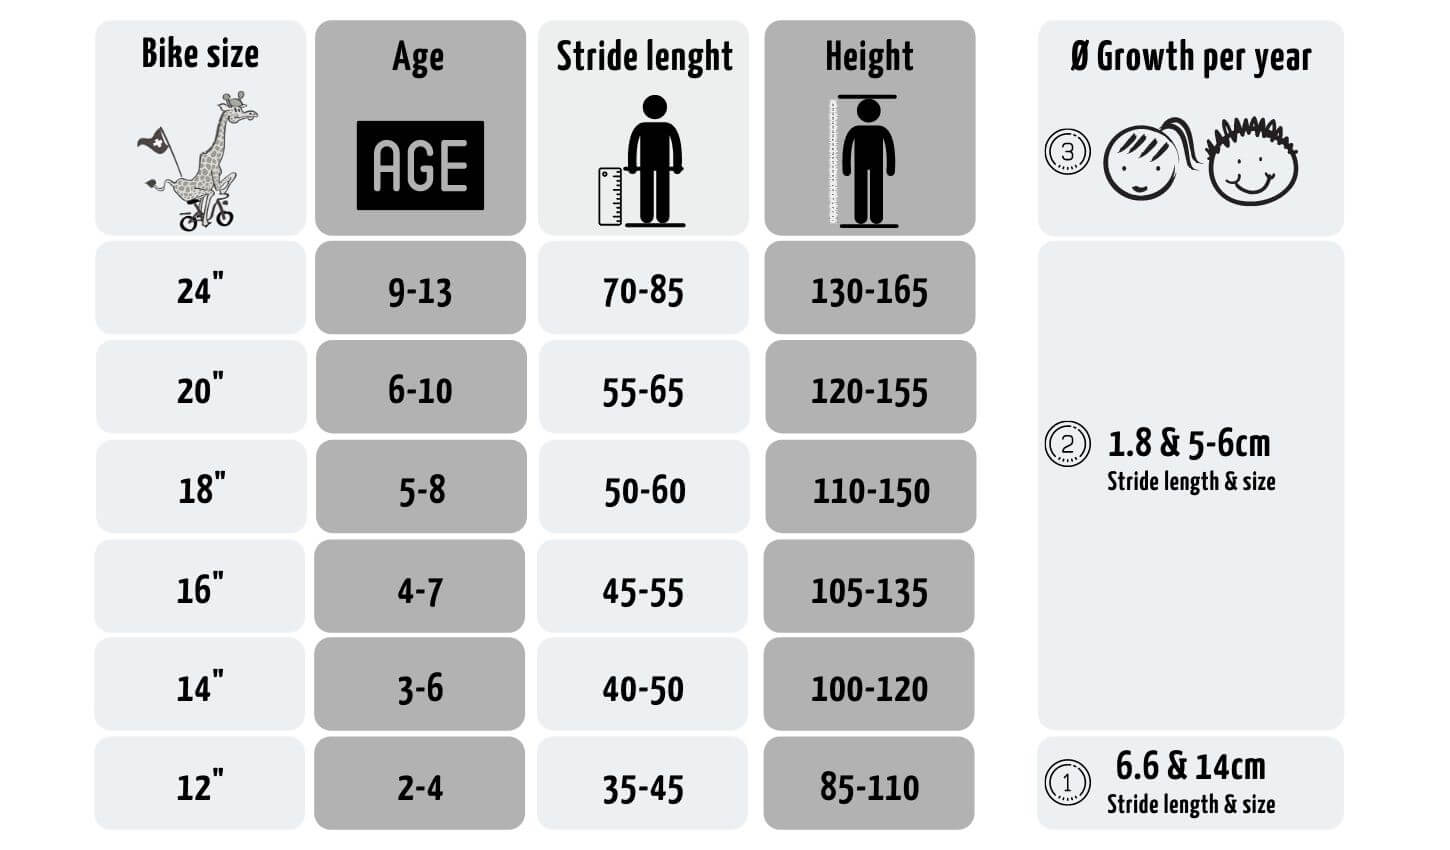 Children's bike size table with tips for buying a children's bike